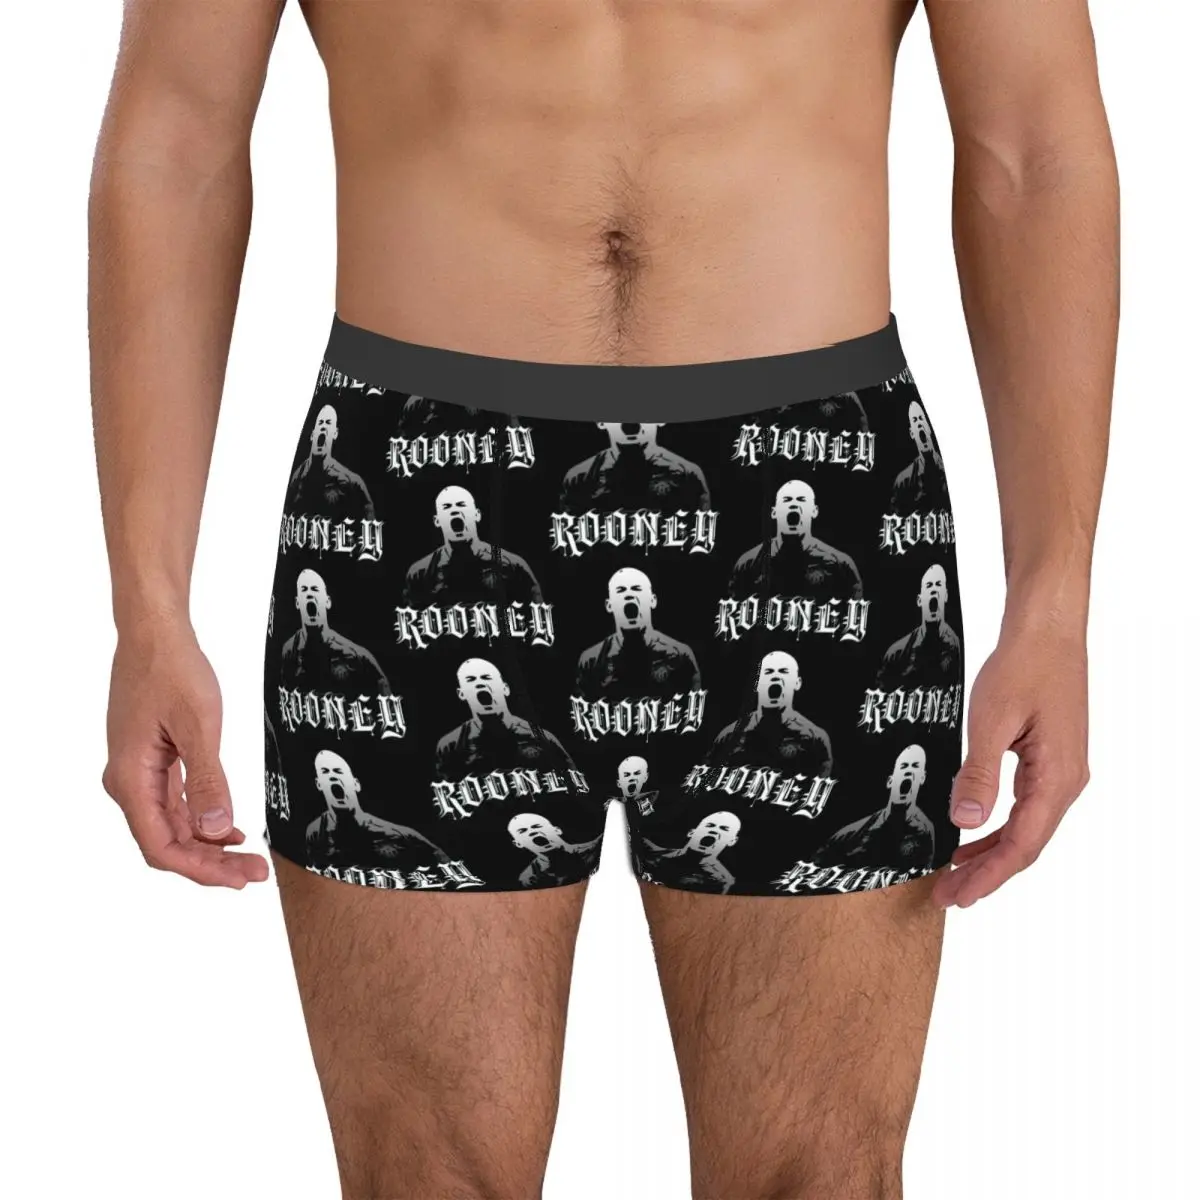 

England 7 Waynes And Rooneys Men's Boxer Briefs Novelty Sexy Underclothing Football Gift Humor Graphic Spring Wearable